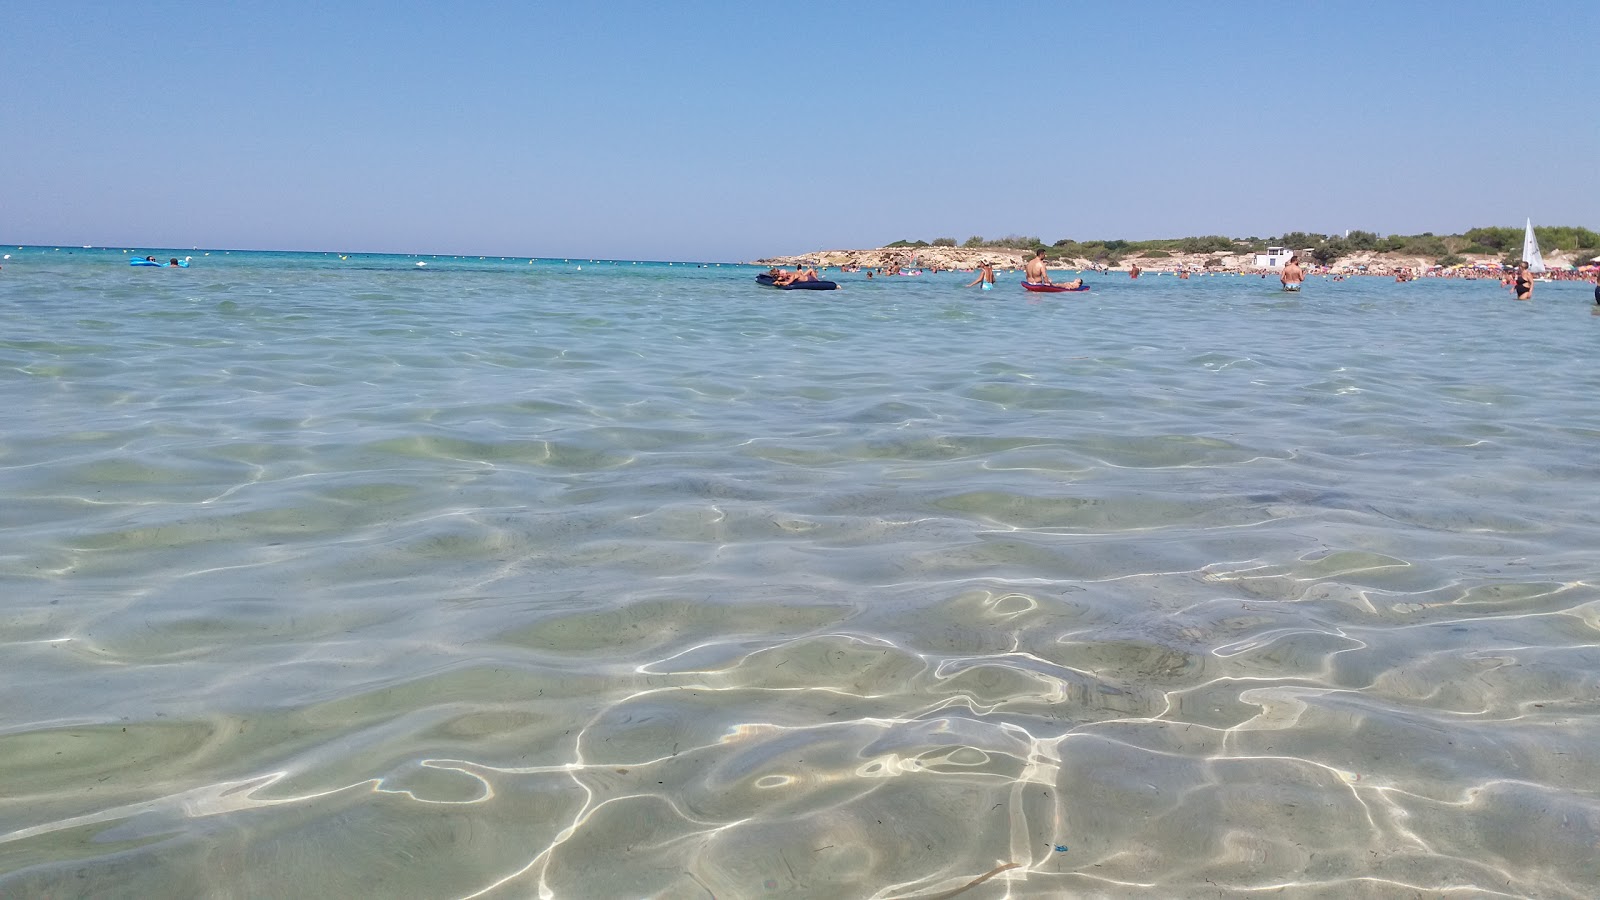 Photo of Spiaggia di Lido Silvana - recommended for family travellers with kids